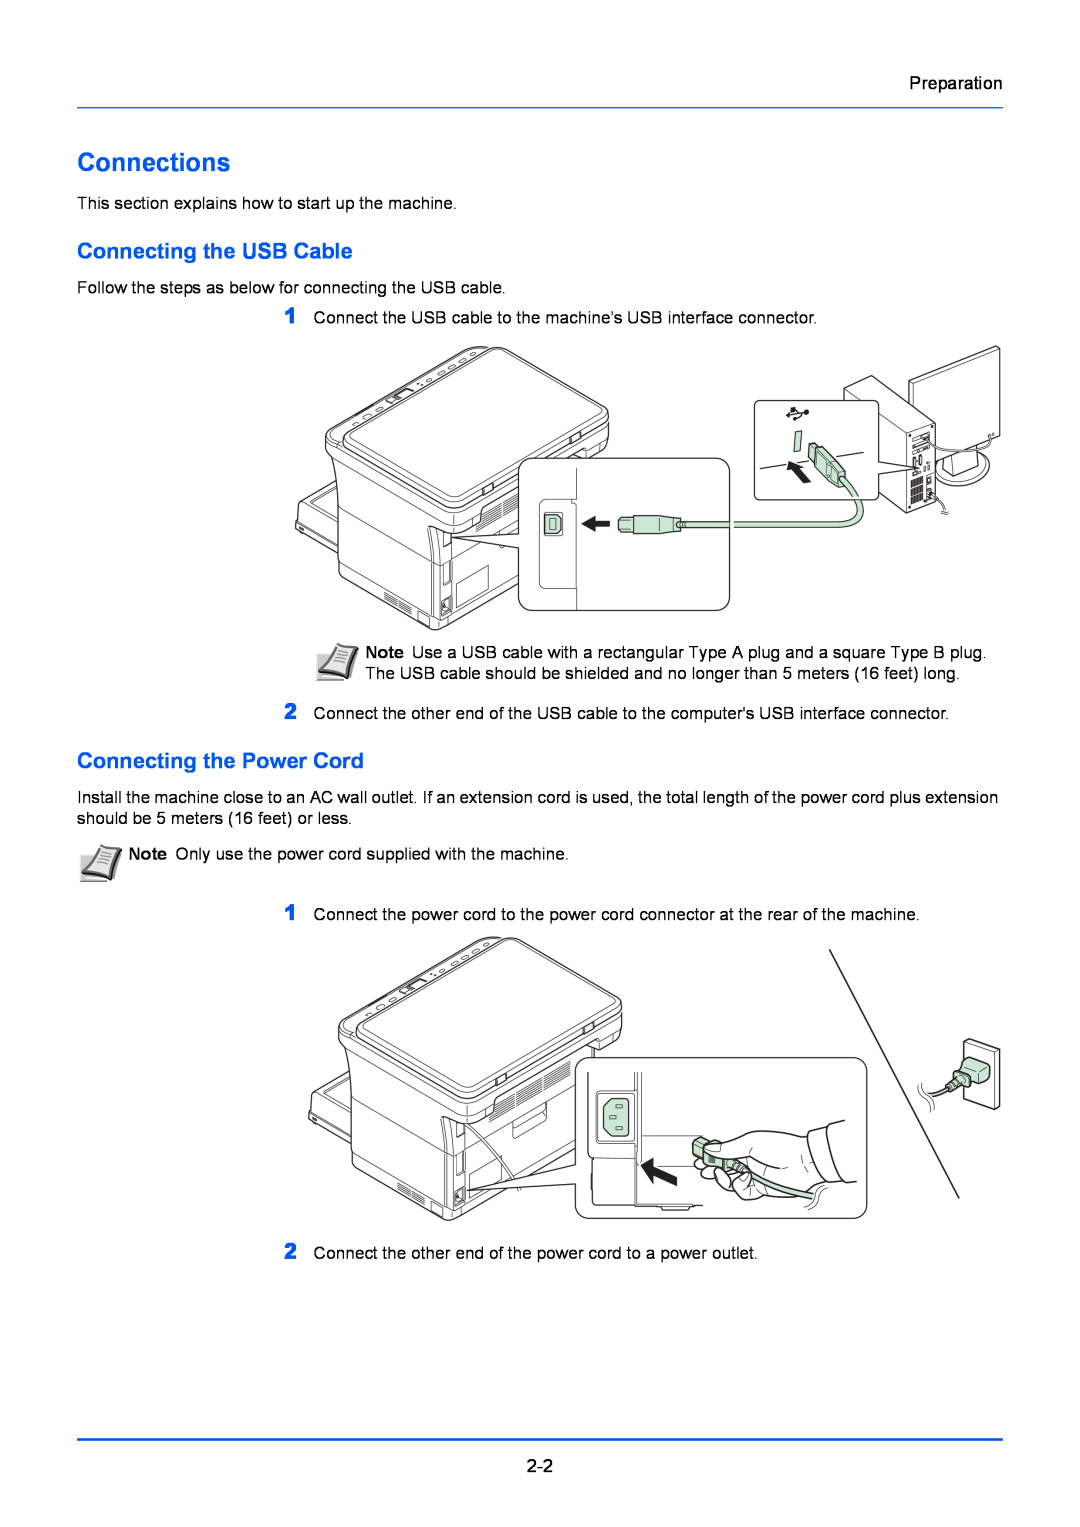 Kyocera FS-1020MFP, FS-1220MFP manual Connections, Connecting the USB Cable, Connecting the Power Cord 